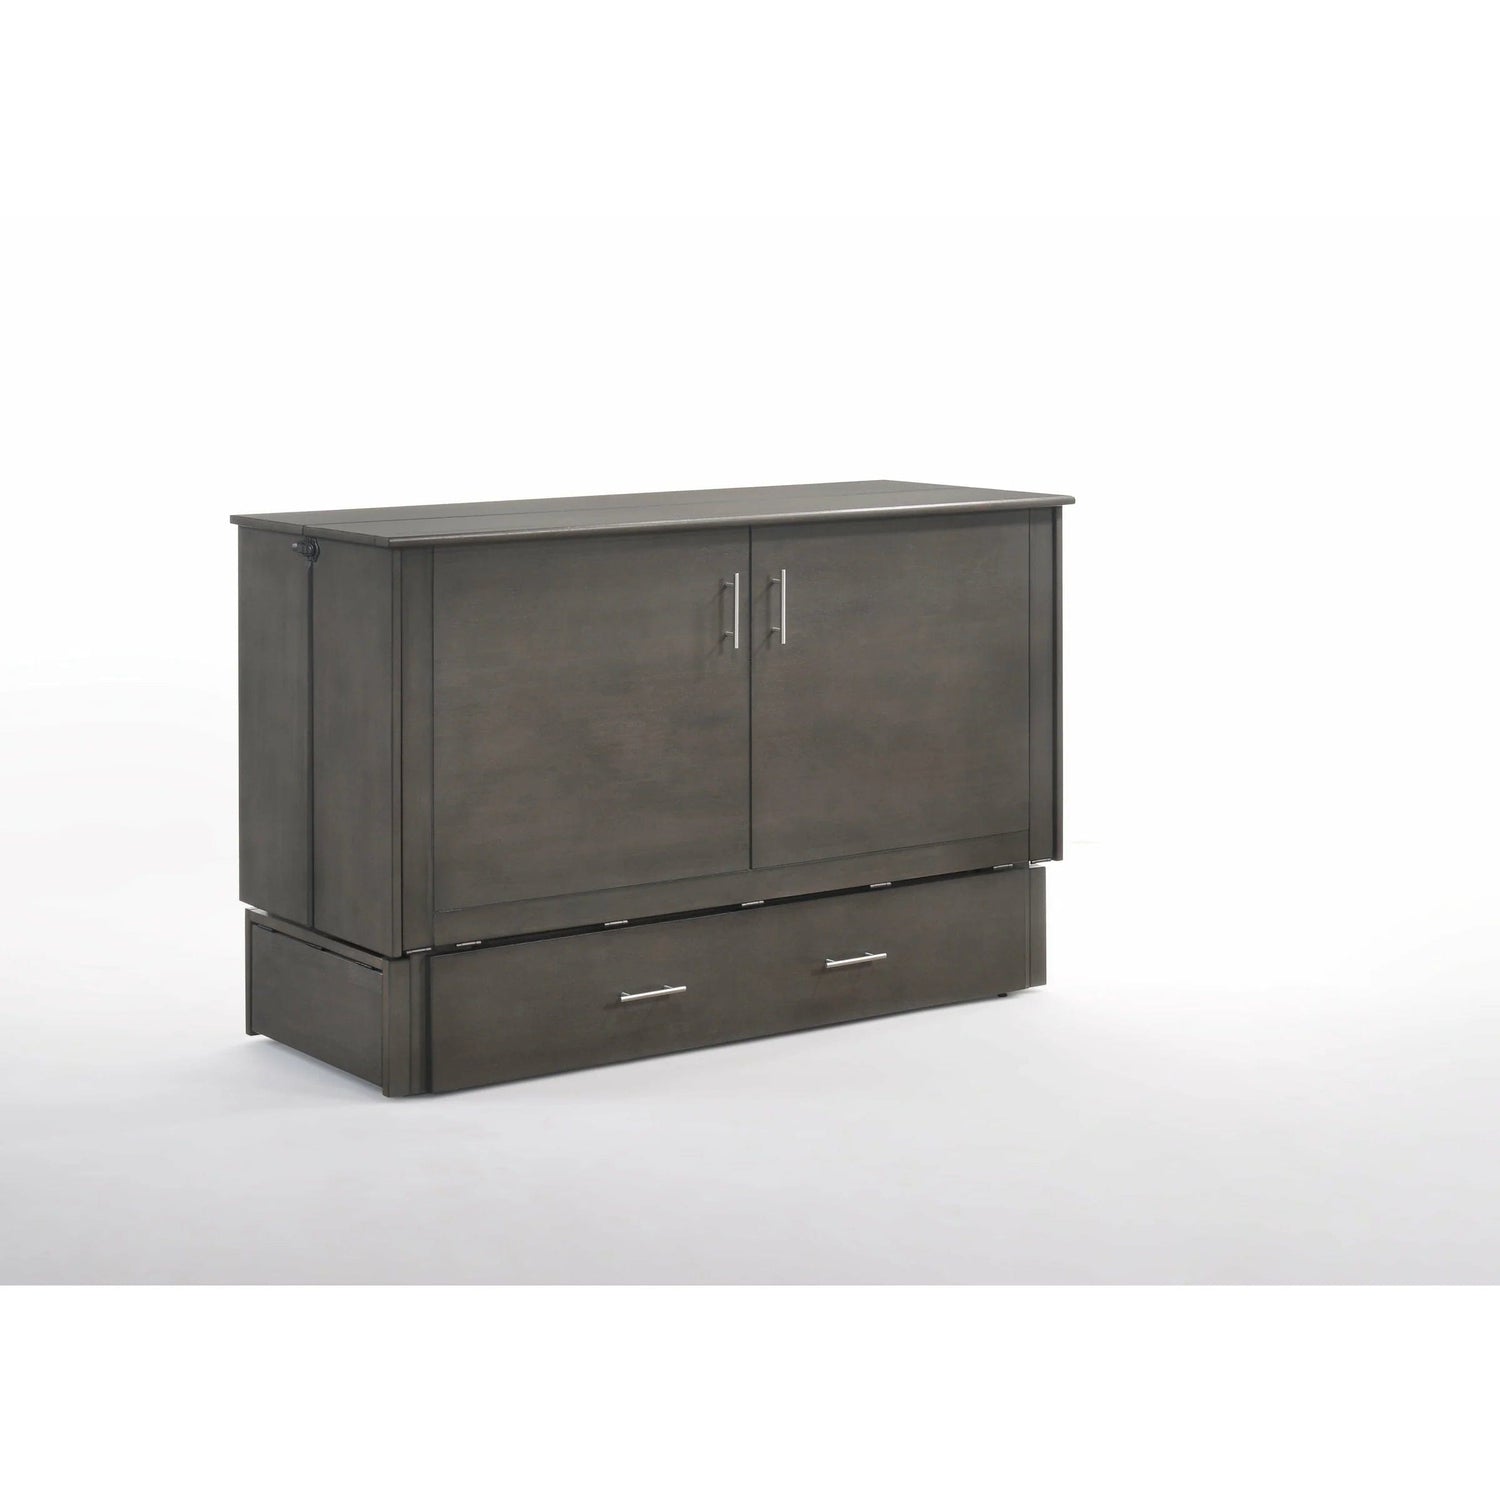 Night and Day Furniture Sagebrush Queen Murphy Cabinet Bed in in Stonewash Finish with Mattress